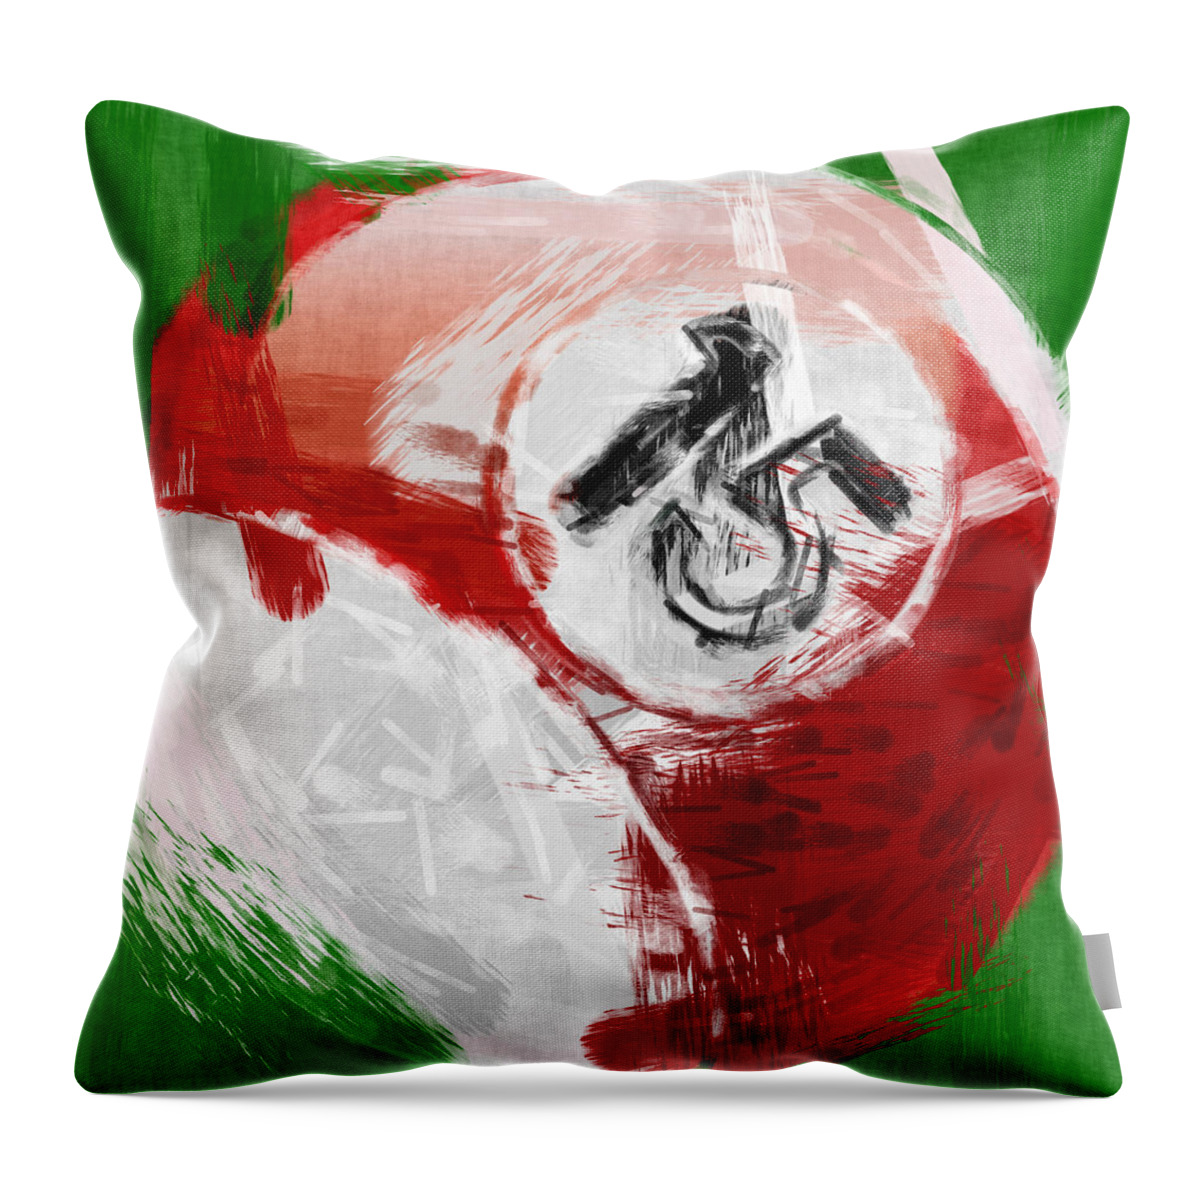 15 Throw Pillow featuring the photograph Number Fifteen Billiards Ball Abstract by David G Paul